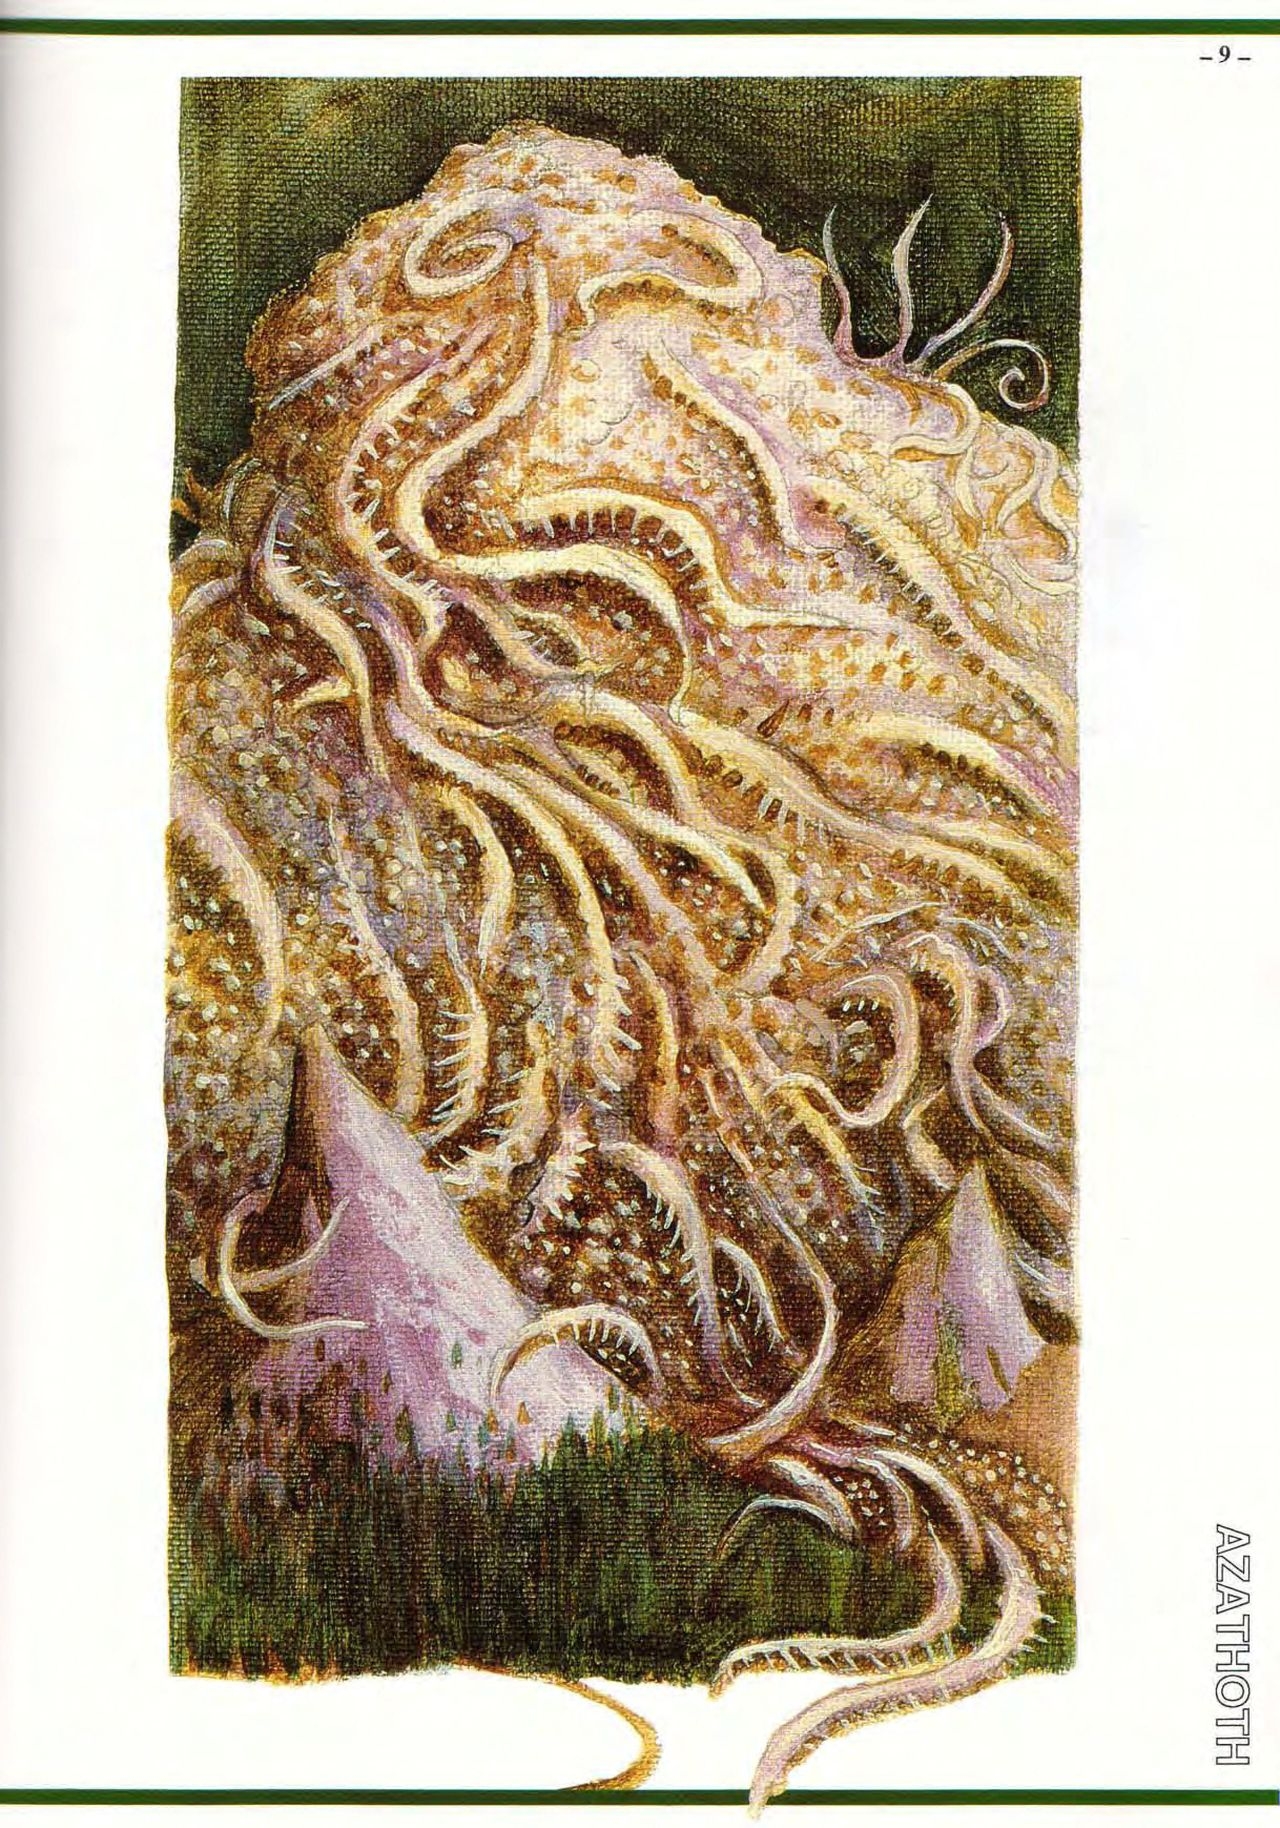 S. Petersen's Field Guide to Cthulhu Monsters 8